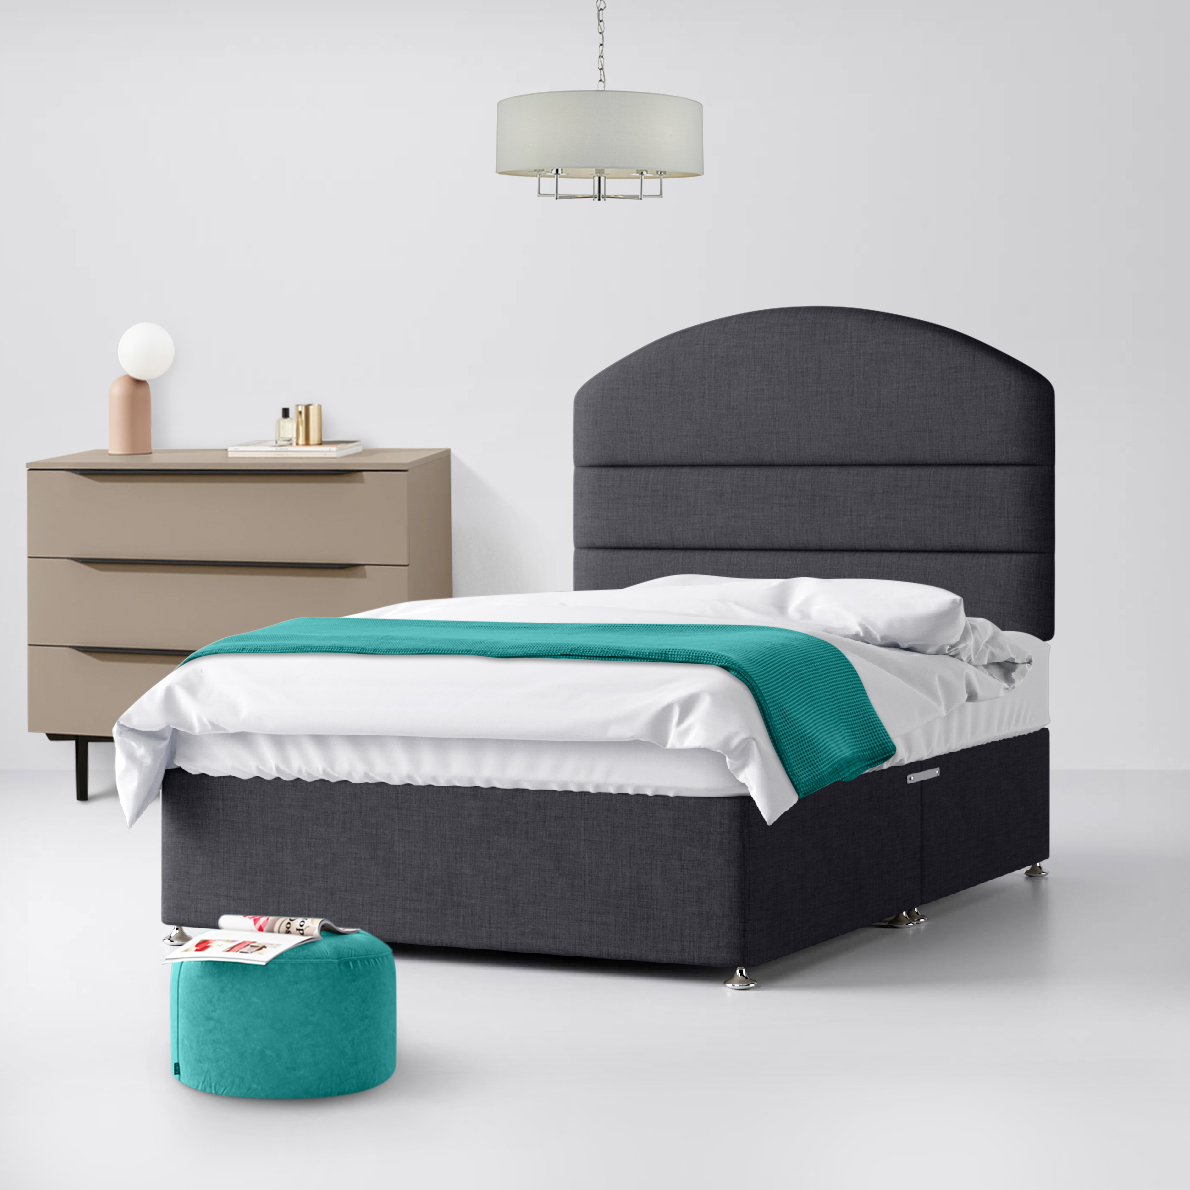 King Size - Divan Bed and Dudley Lined Headboard - Dark Grey - Charcoal - Fabric - 5ft - Happy Beds